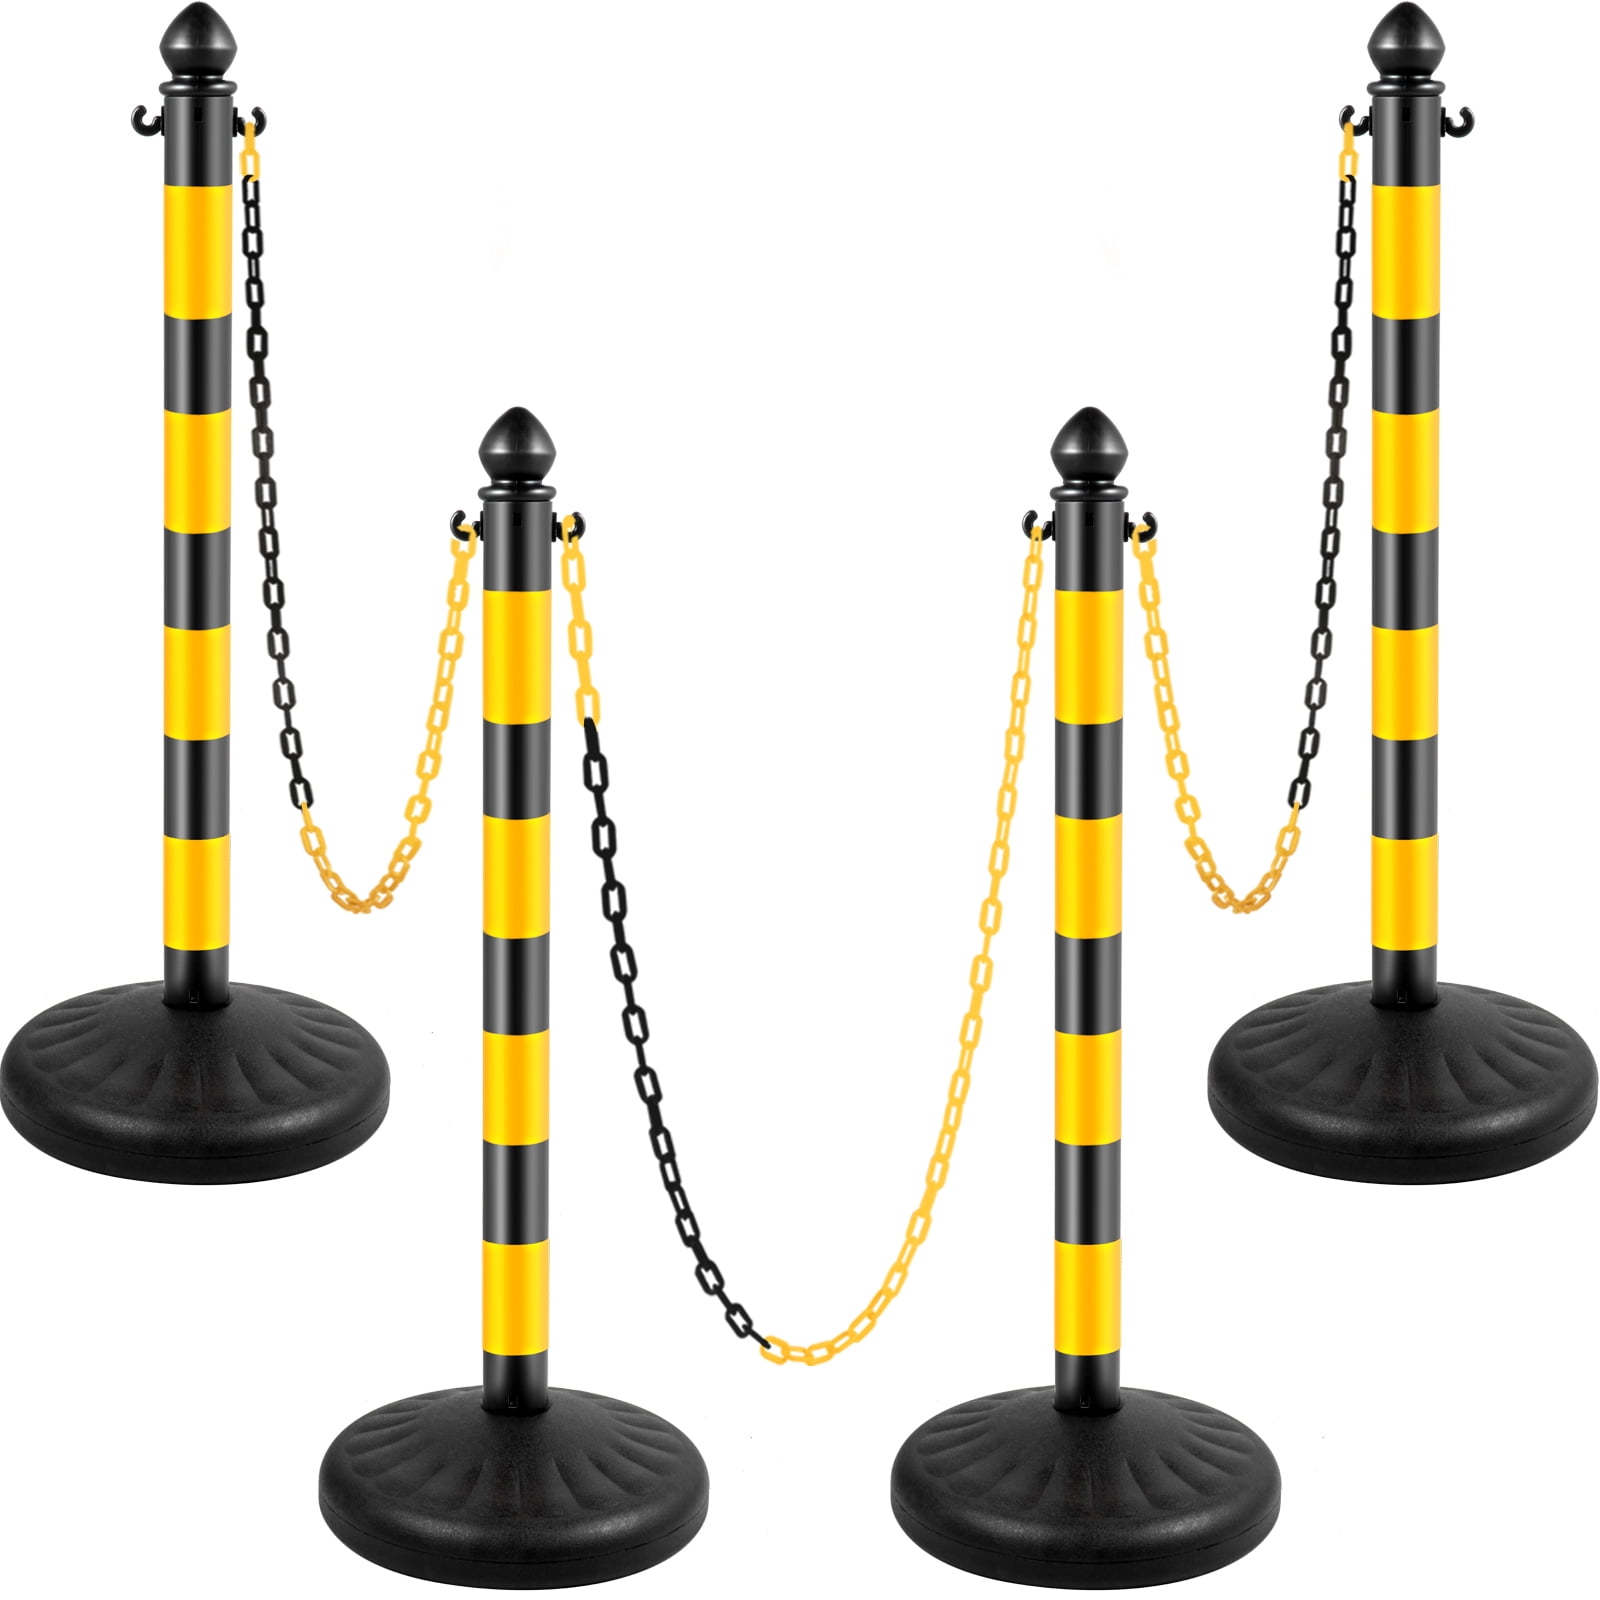 VEVOR Plastic Stanchion, 4pcs Chain Stanchion, Outdoor Stanchion w/ 4 x  39inch Long Chains, PE Plastic Crowd Control Barrier for Warning/Crowd  Control 